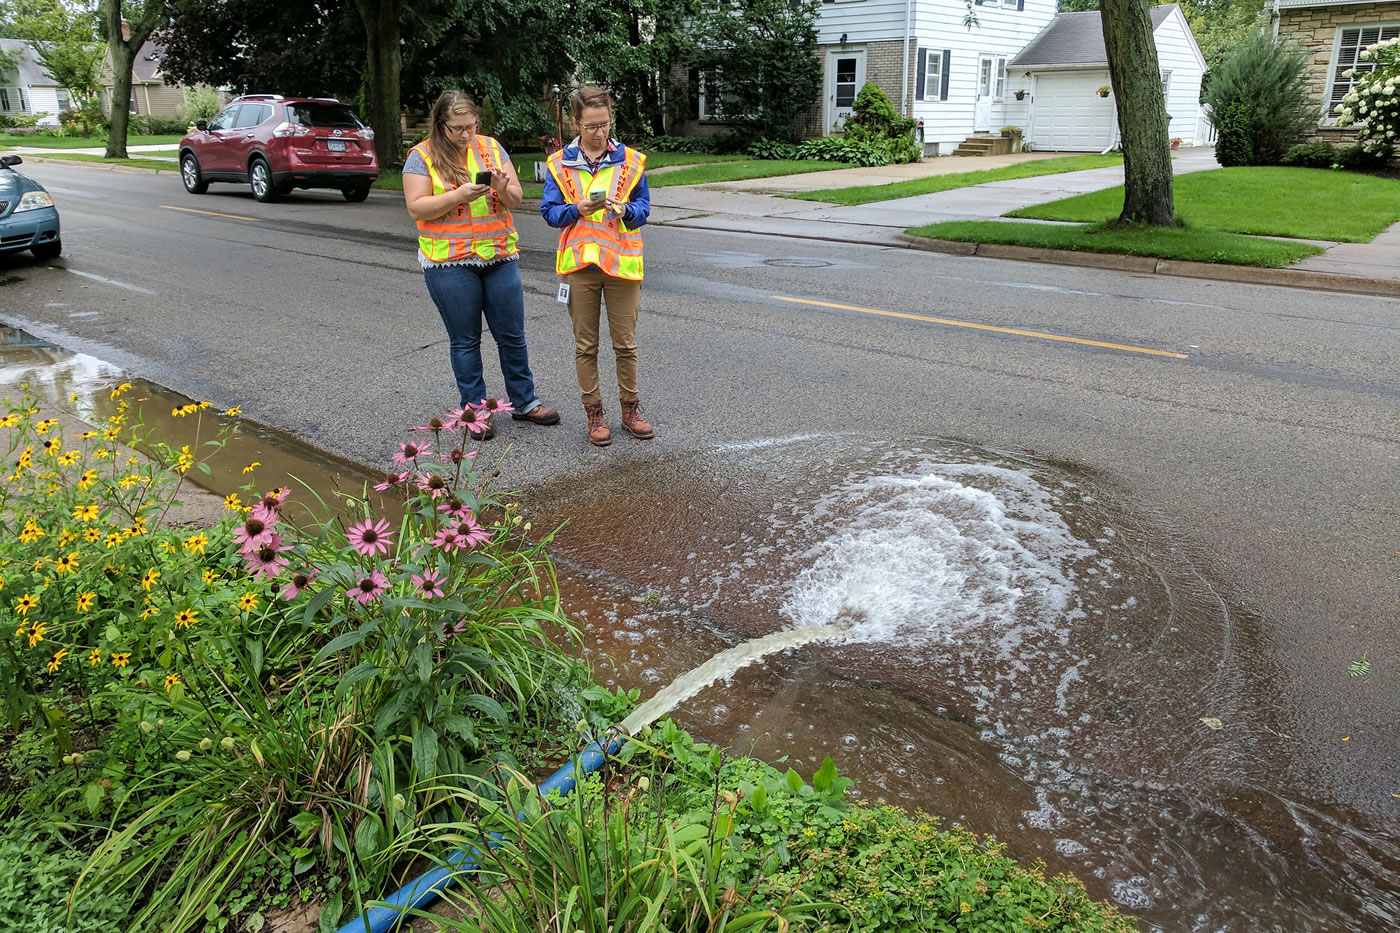 A possible illicit discharge of water into the street.